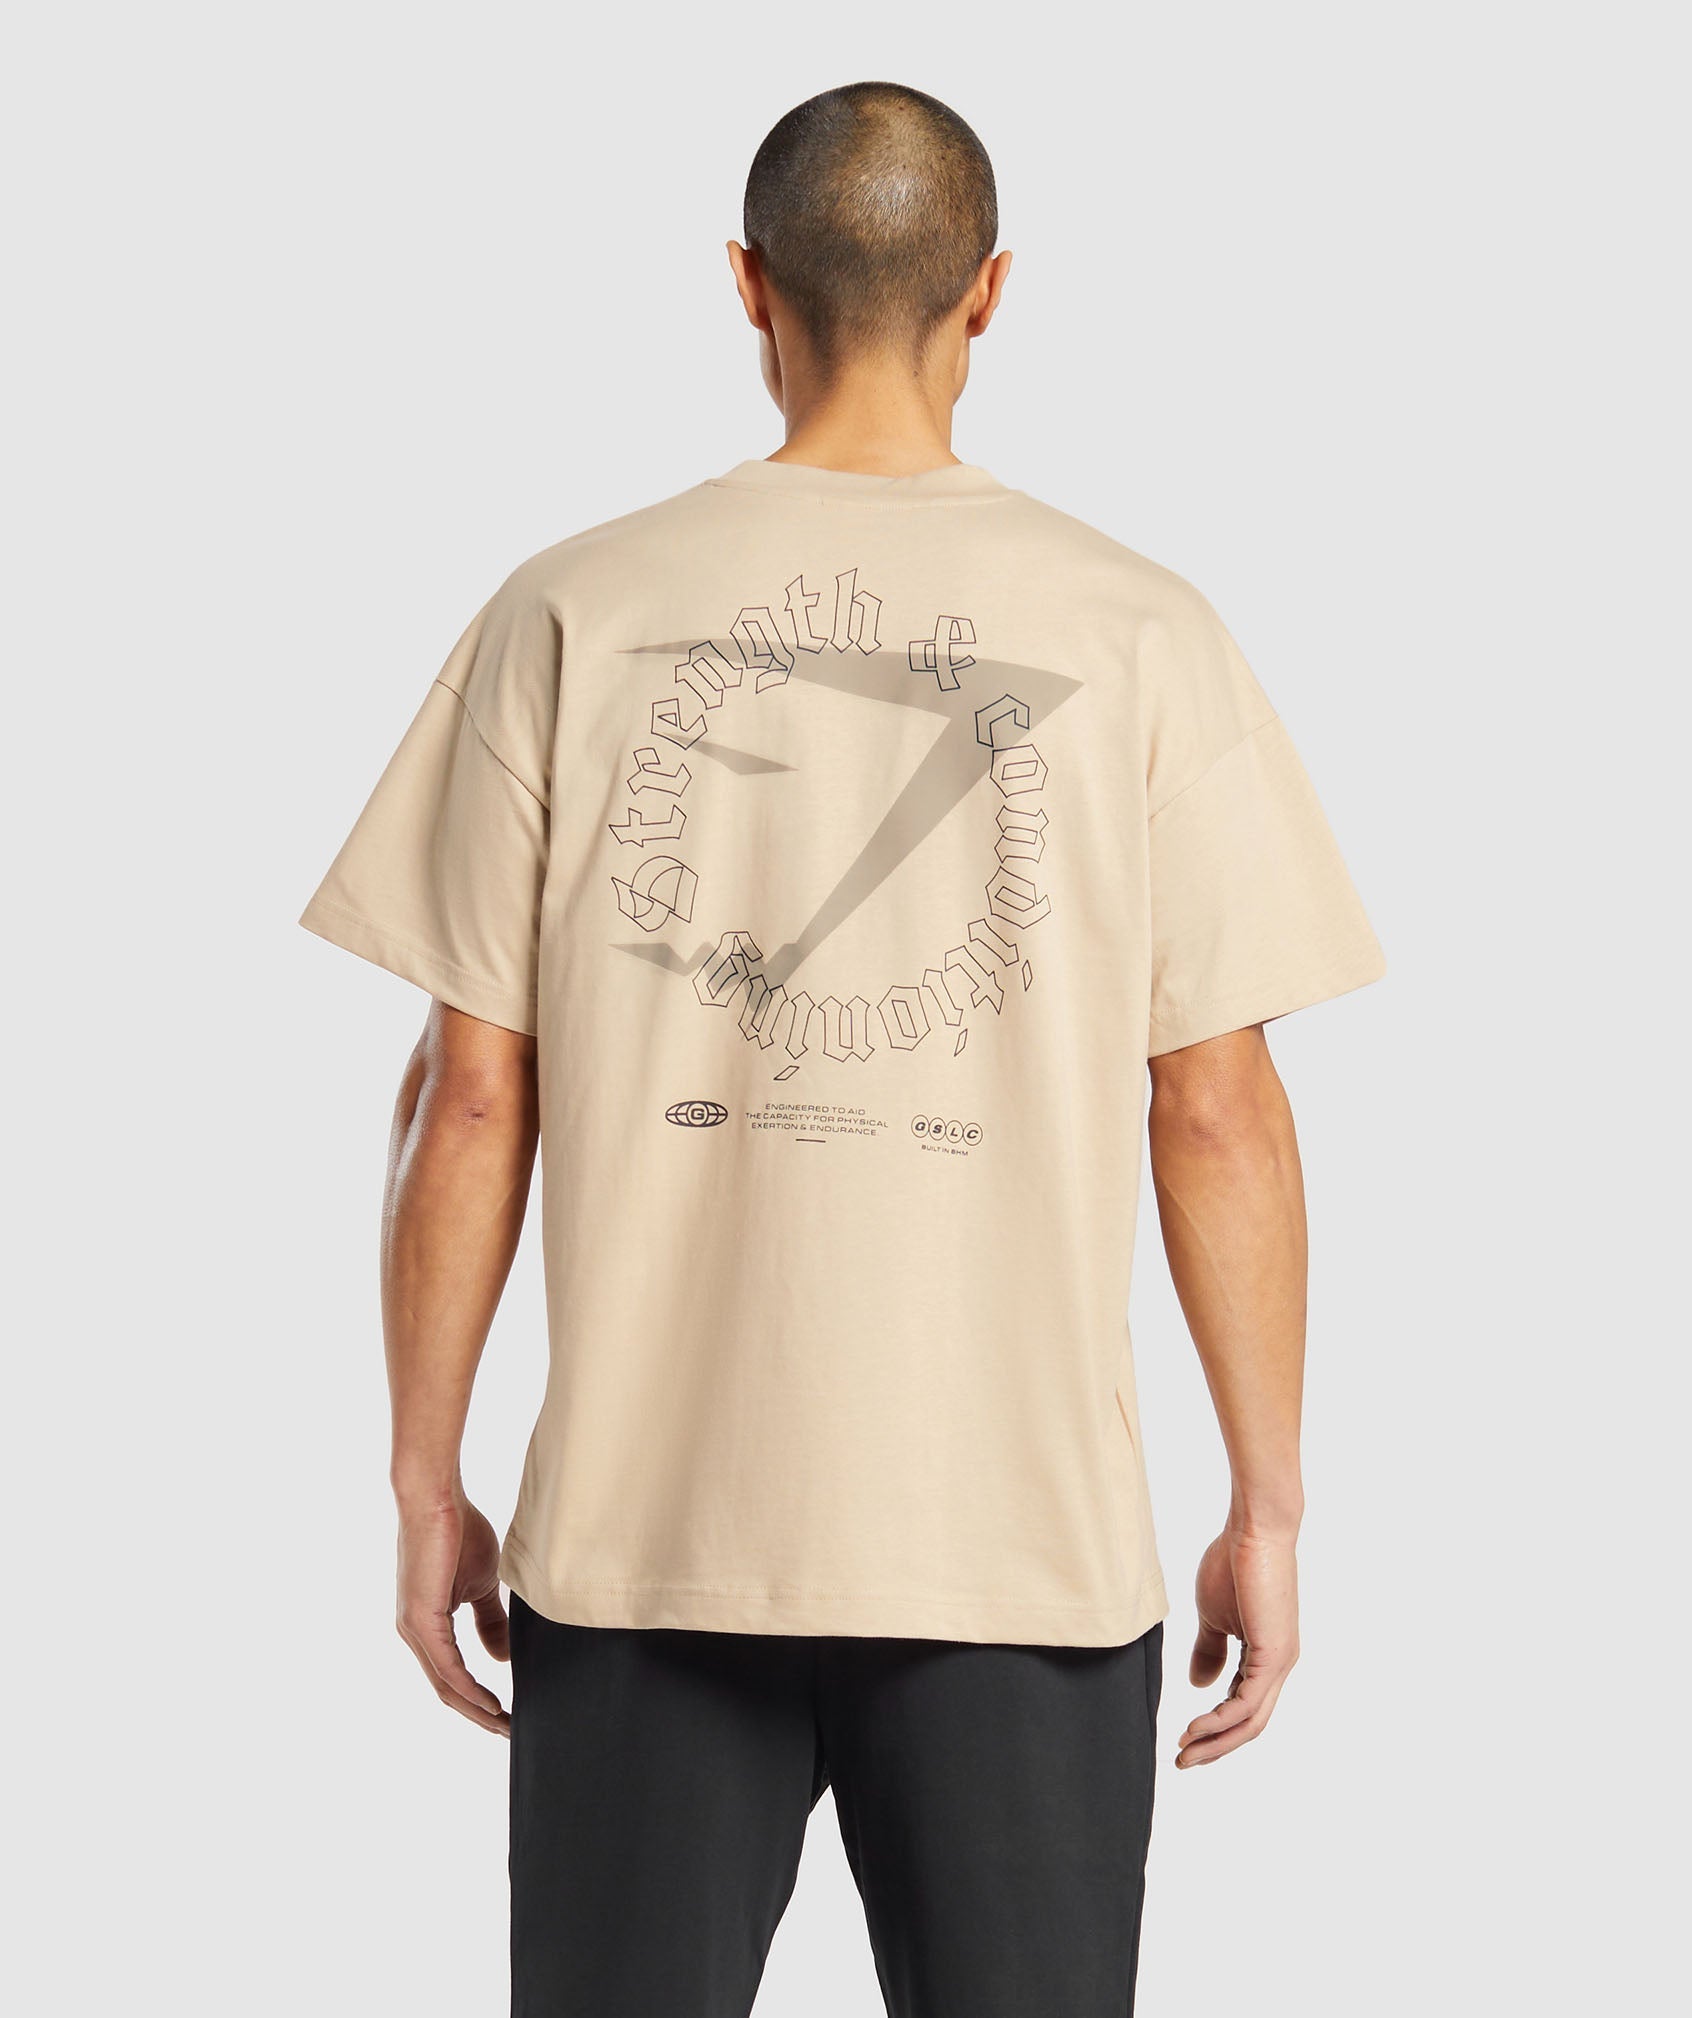 Strength and Conditioning T-Shirt in Vanilla Beige